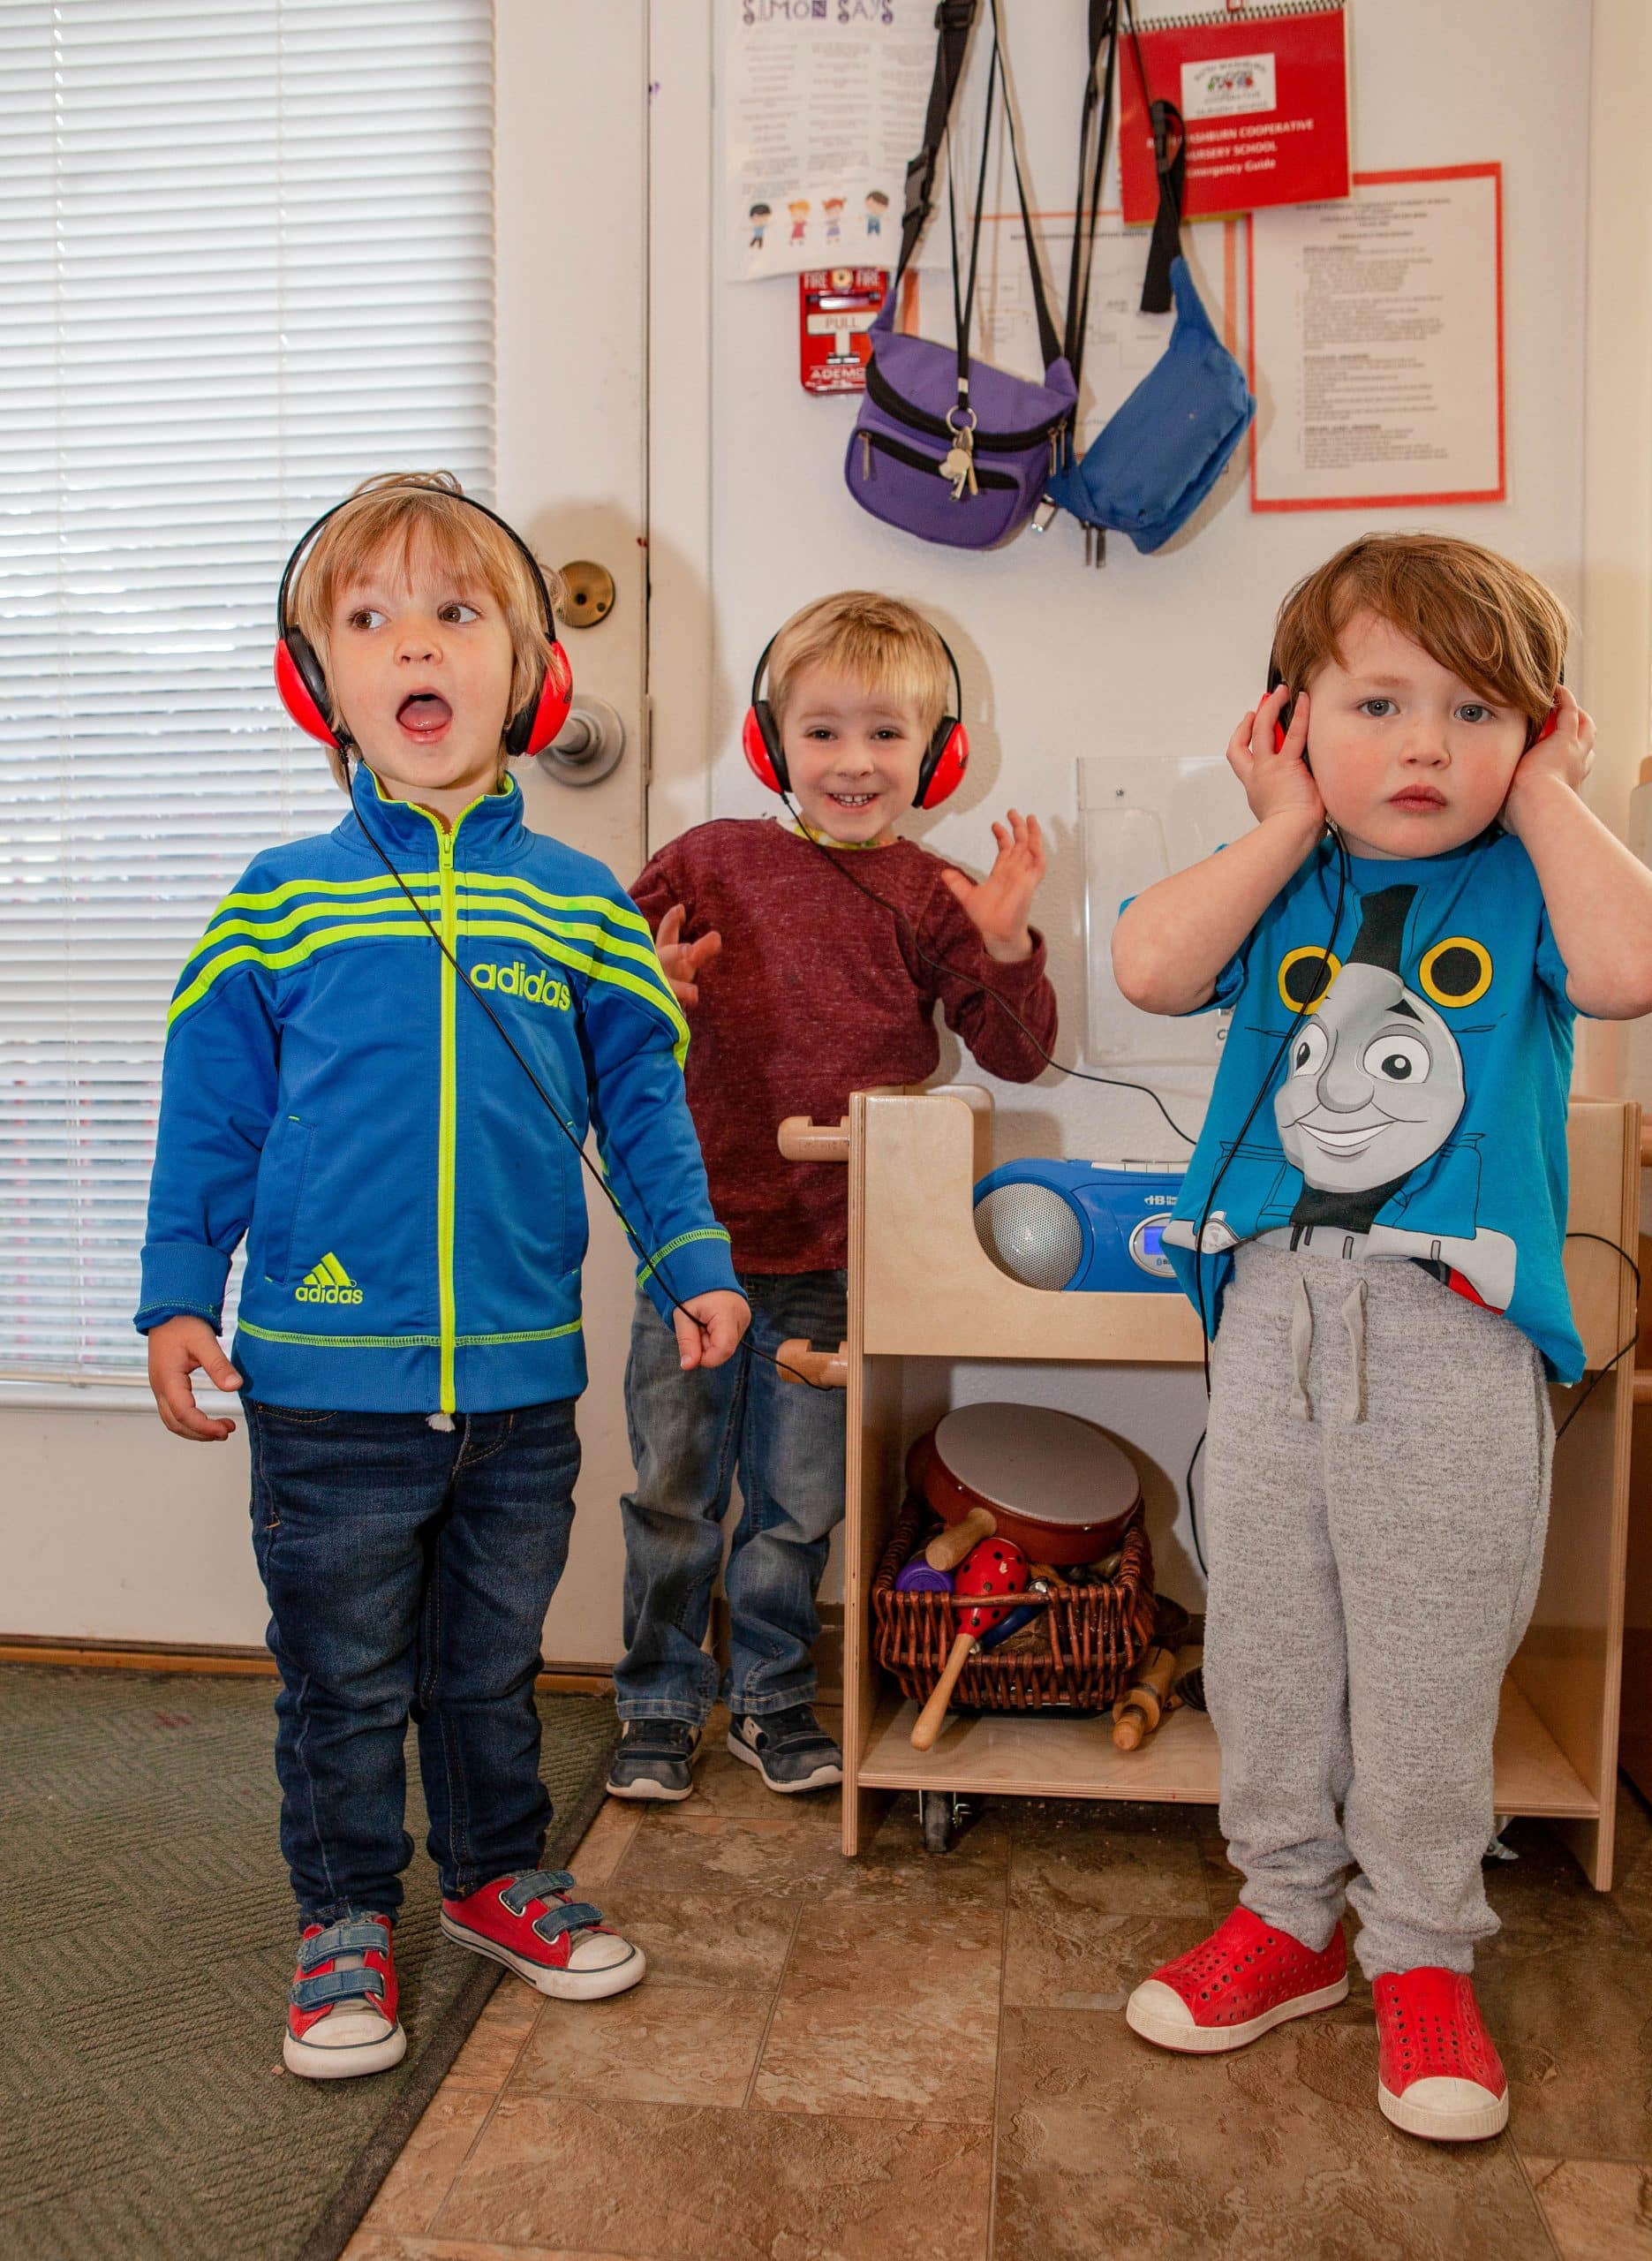 three children in colorful clothing wear red headphones while listenings to music